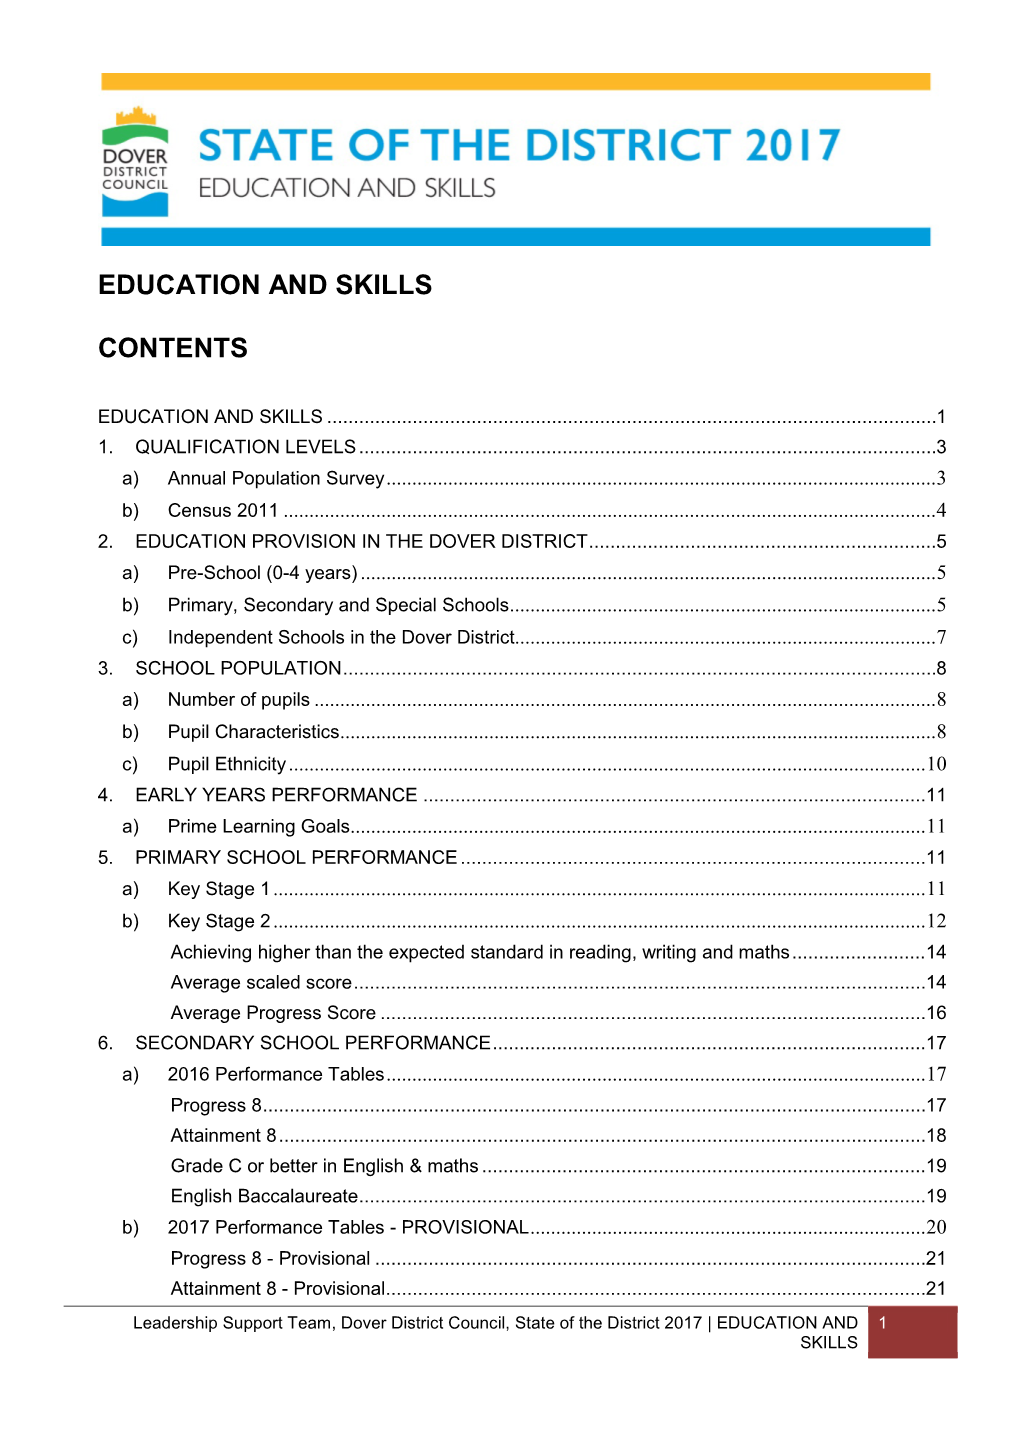 Education and Skills Contents